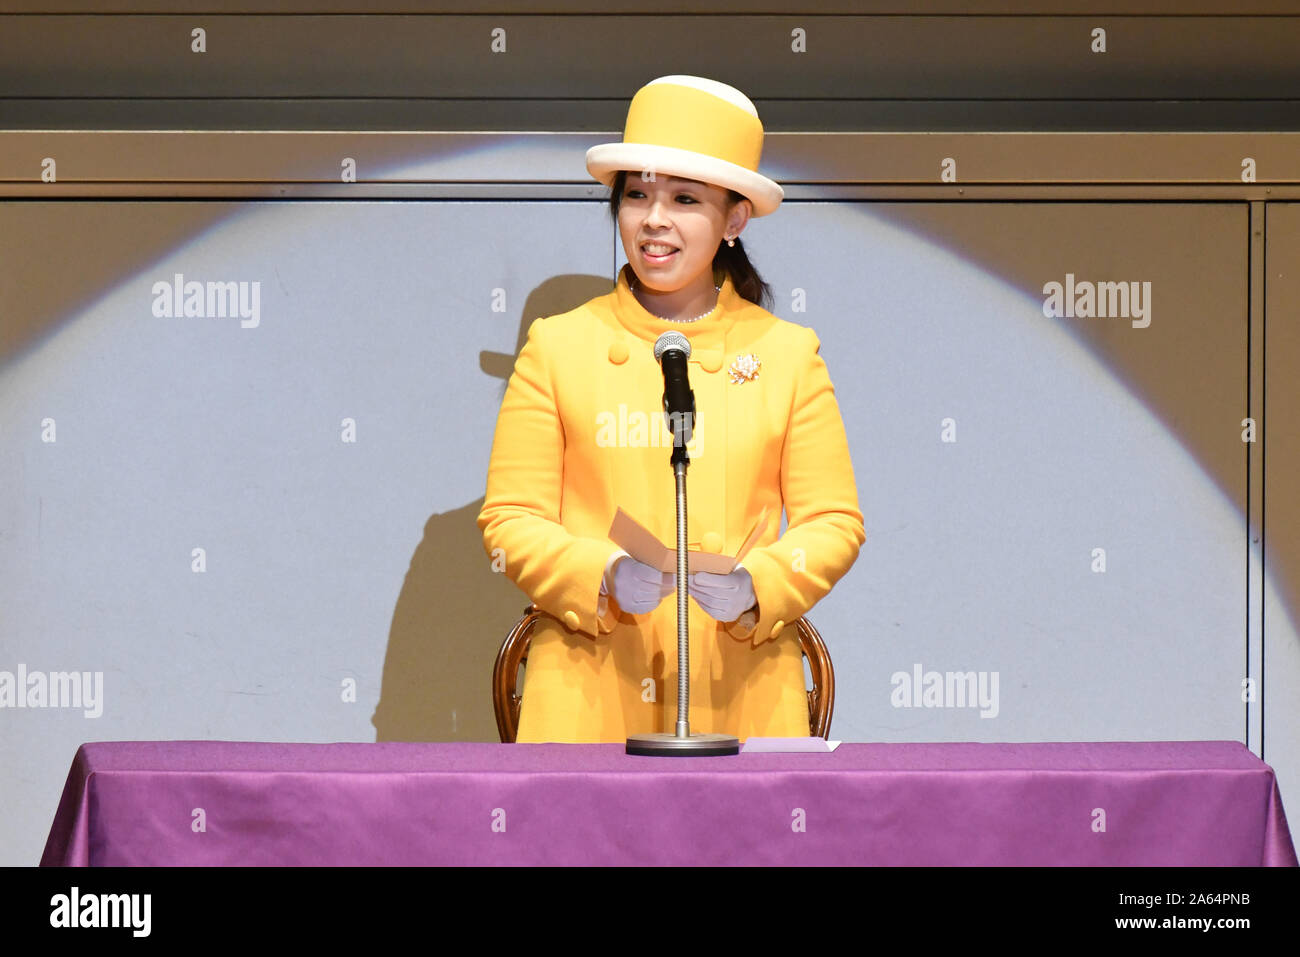 Tokyo, Japan. 24th Oct, 2019. Japan Princess Yoko attends the opening ceremony of the 46th Tokyo Motor Show 2019 in Tokyo, Japan on October 24, 2019. Credit: AFLO/Alamy Live News Credit: Aflo Co. Ltd./Alamy Live News Stock Photo